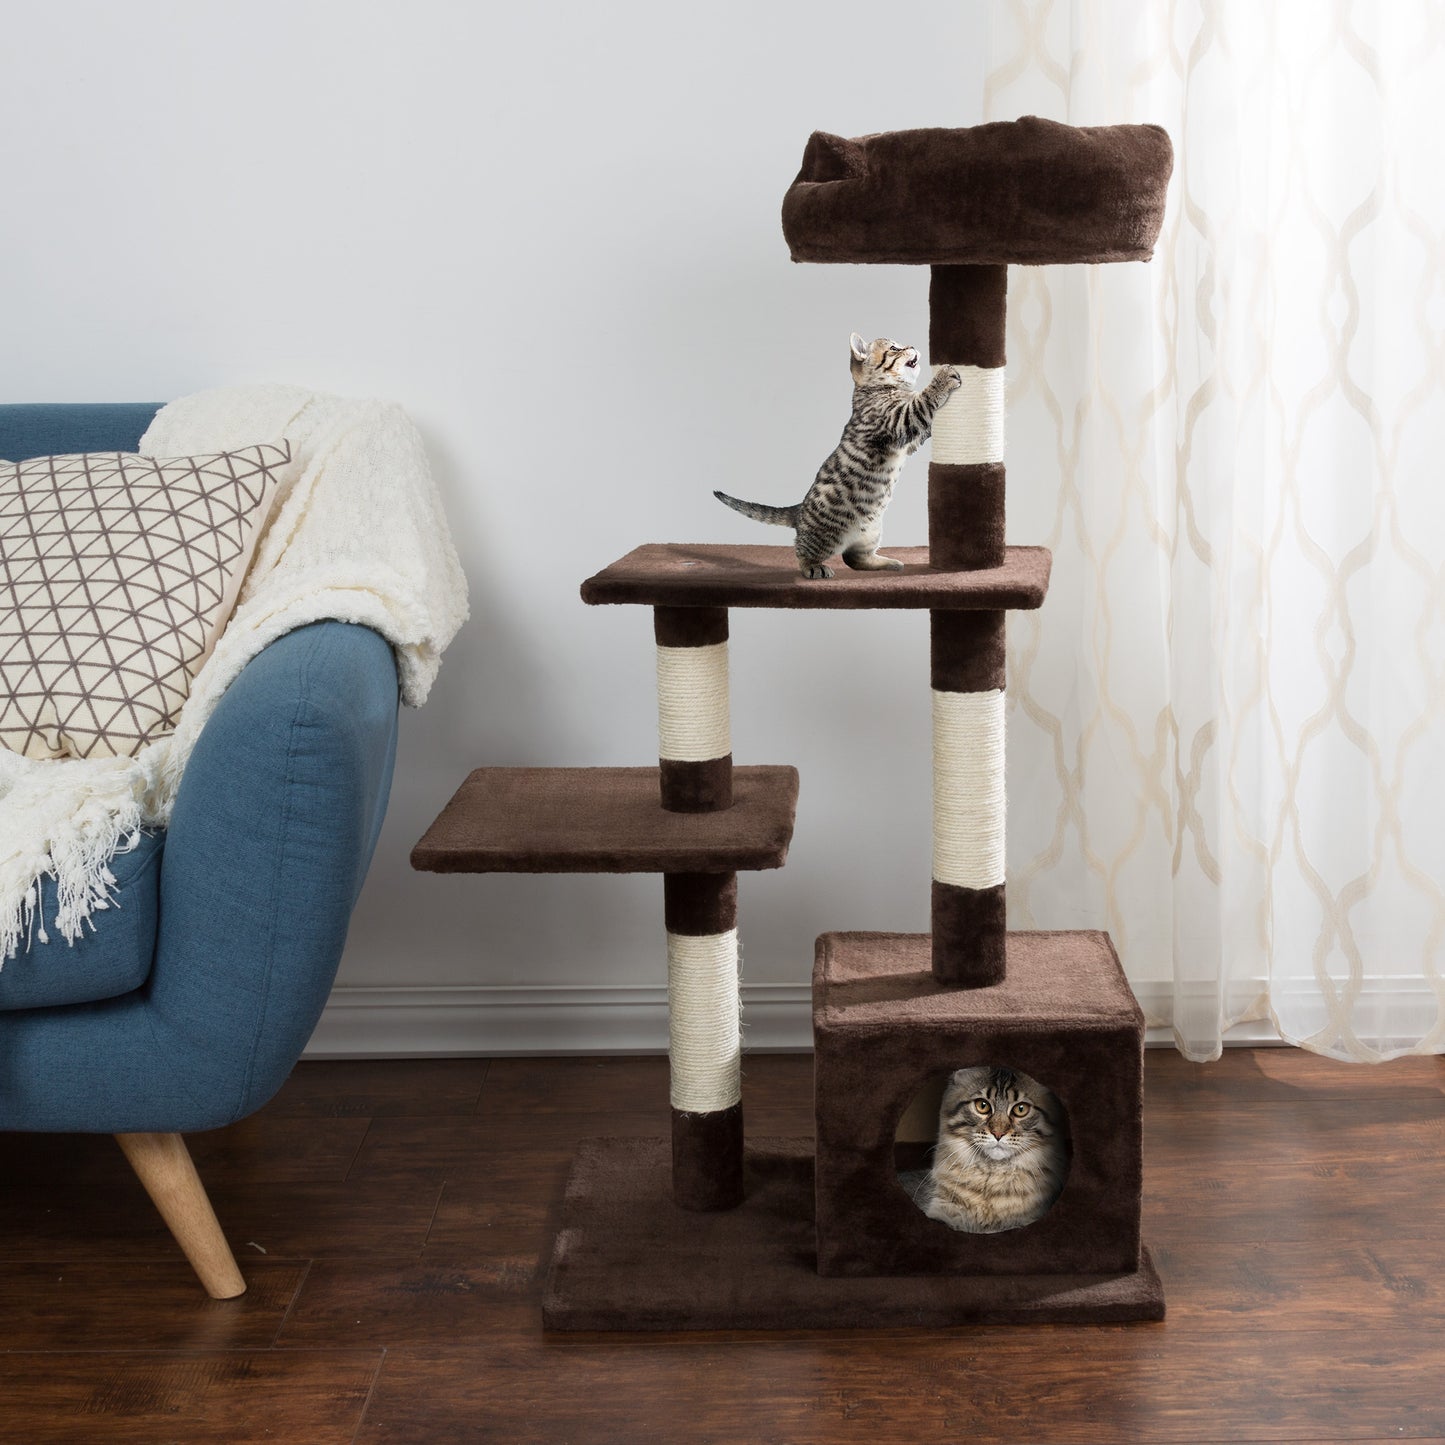 4-Tier Cat Tree with Penthouse Condo